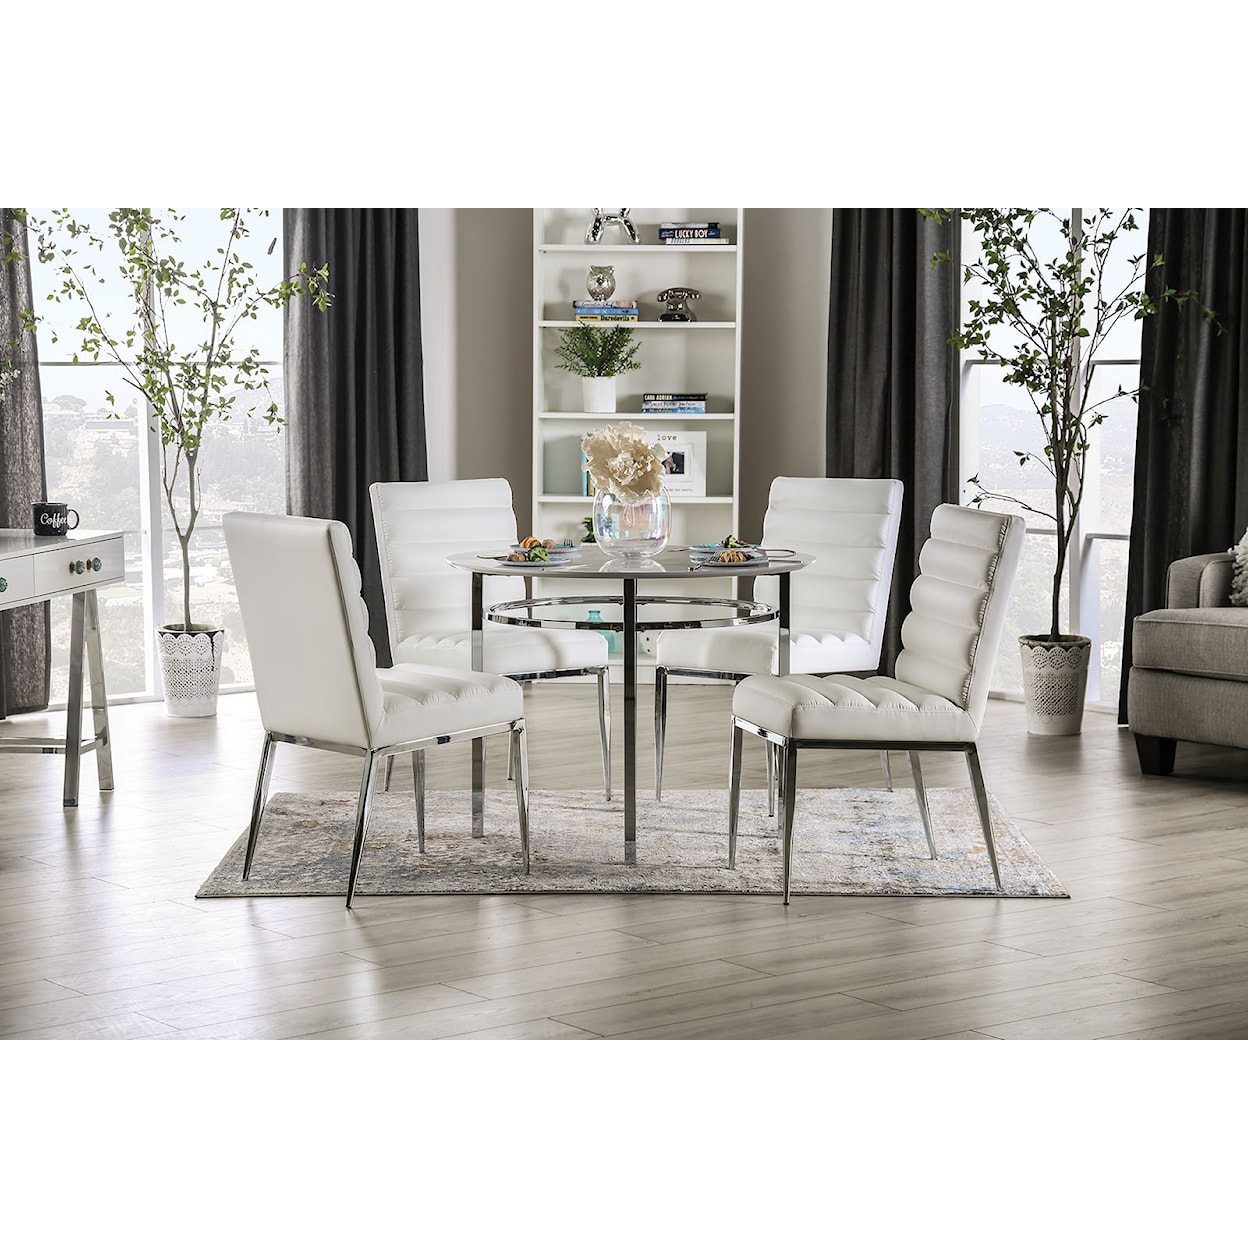 Furniture of America Serena 5-Piece Dining Table Set